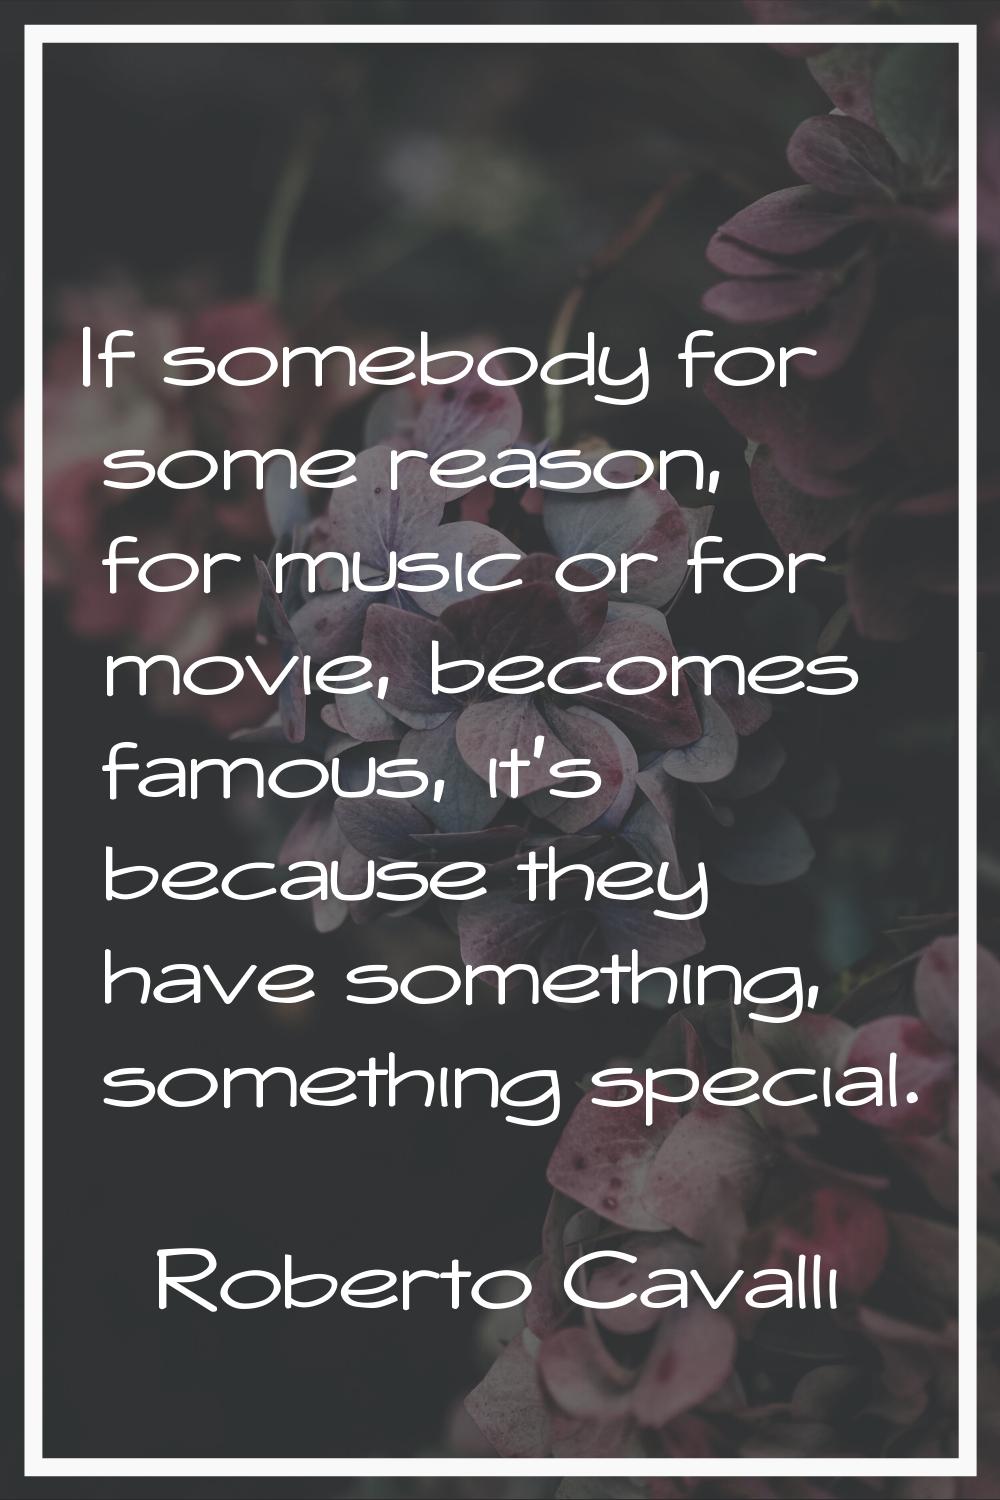 If somebody for some reason, for music or for movie, becomes famous, it's because they have somethi